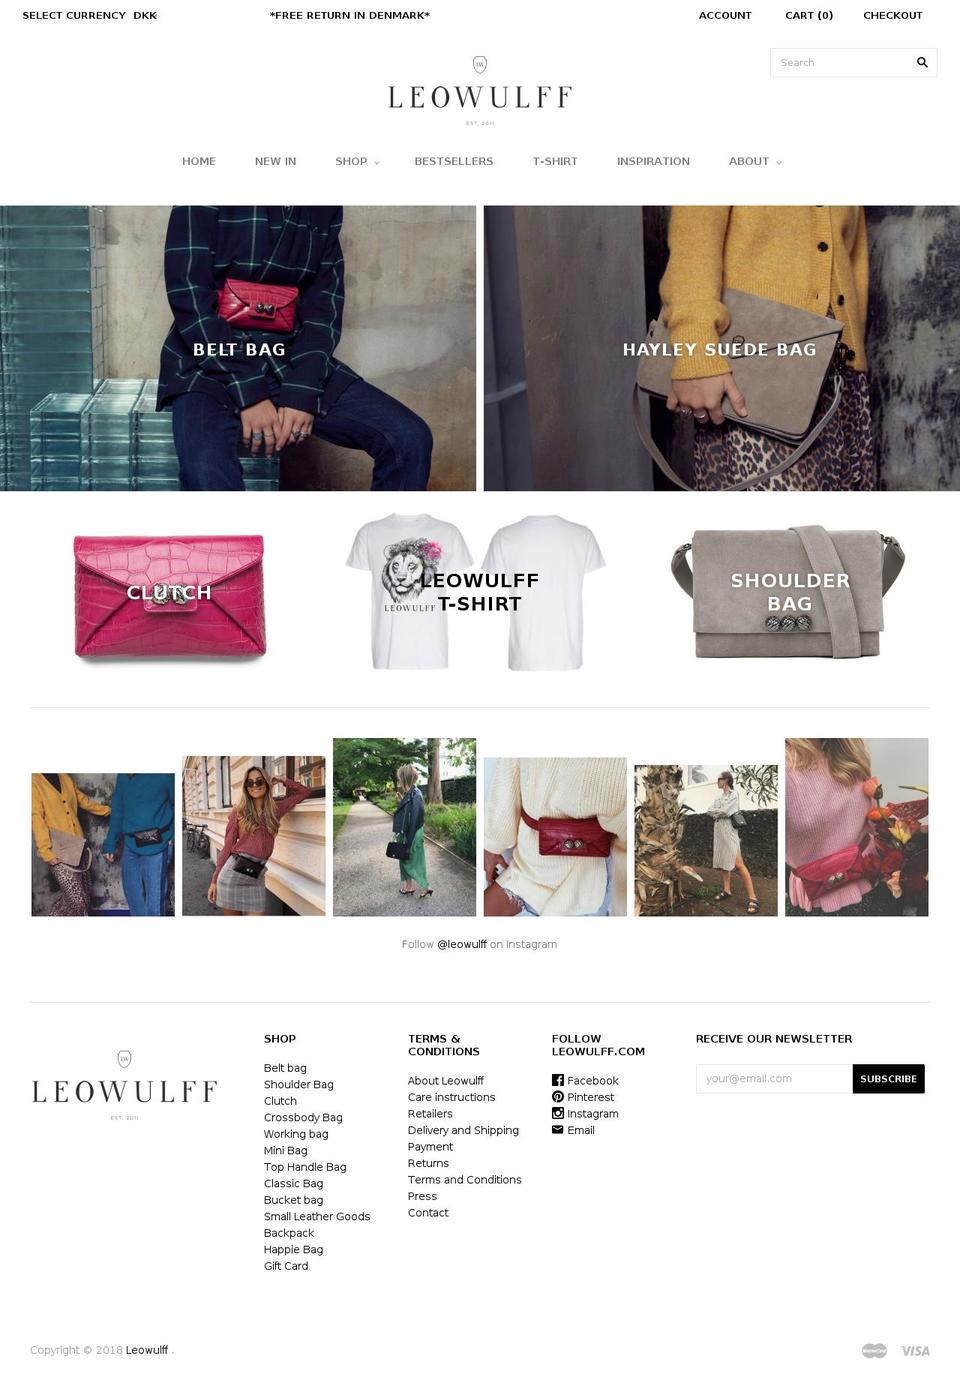 Copy of Leowulff by Satisphy - HC - 18 Aug Shopify theme site example leowulf.com